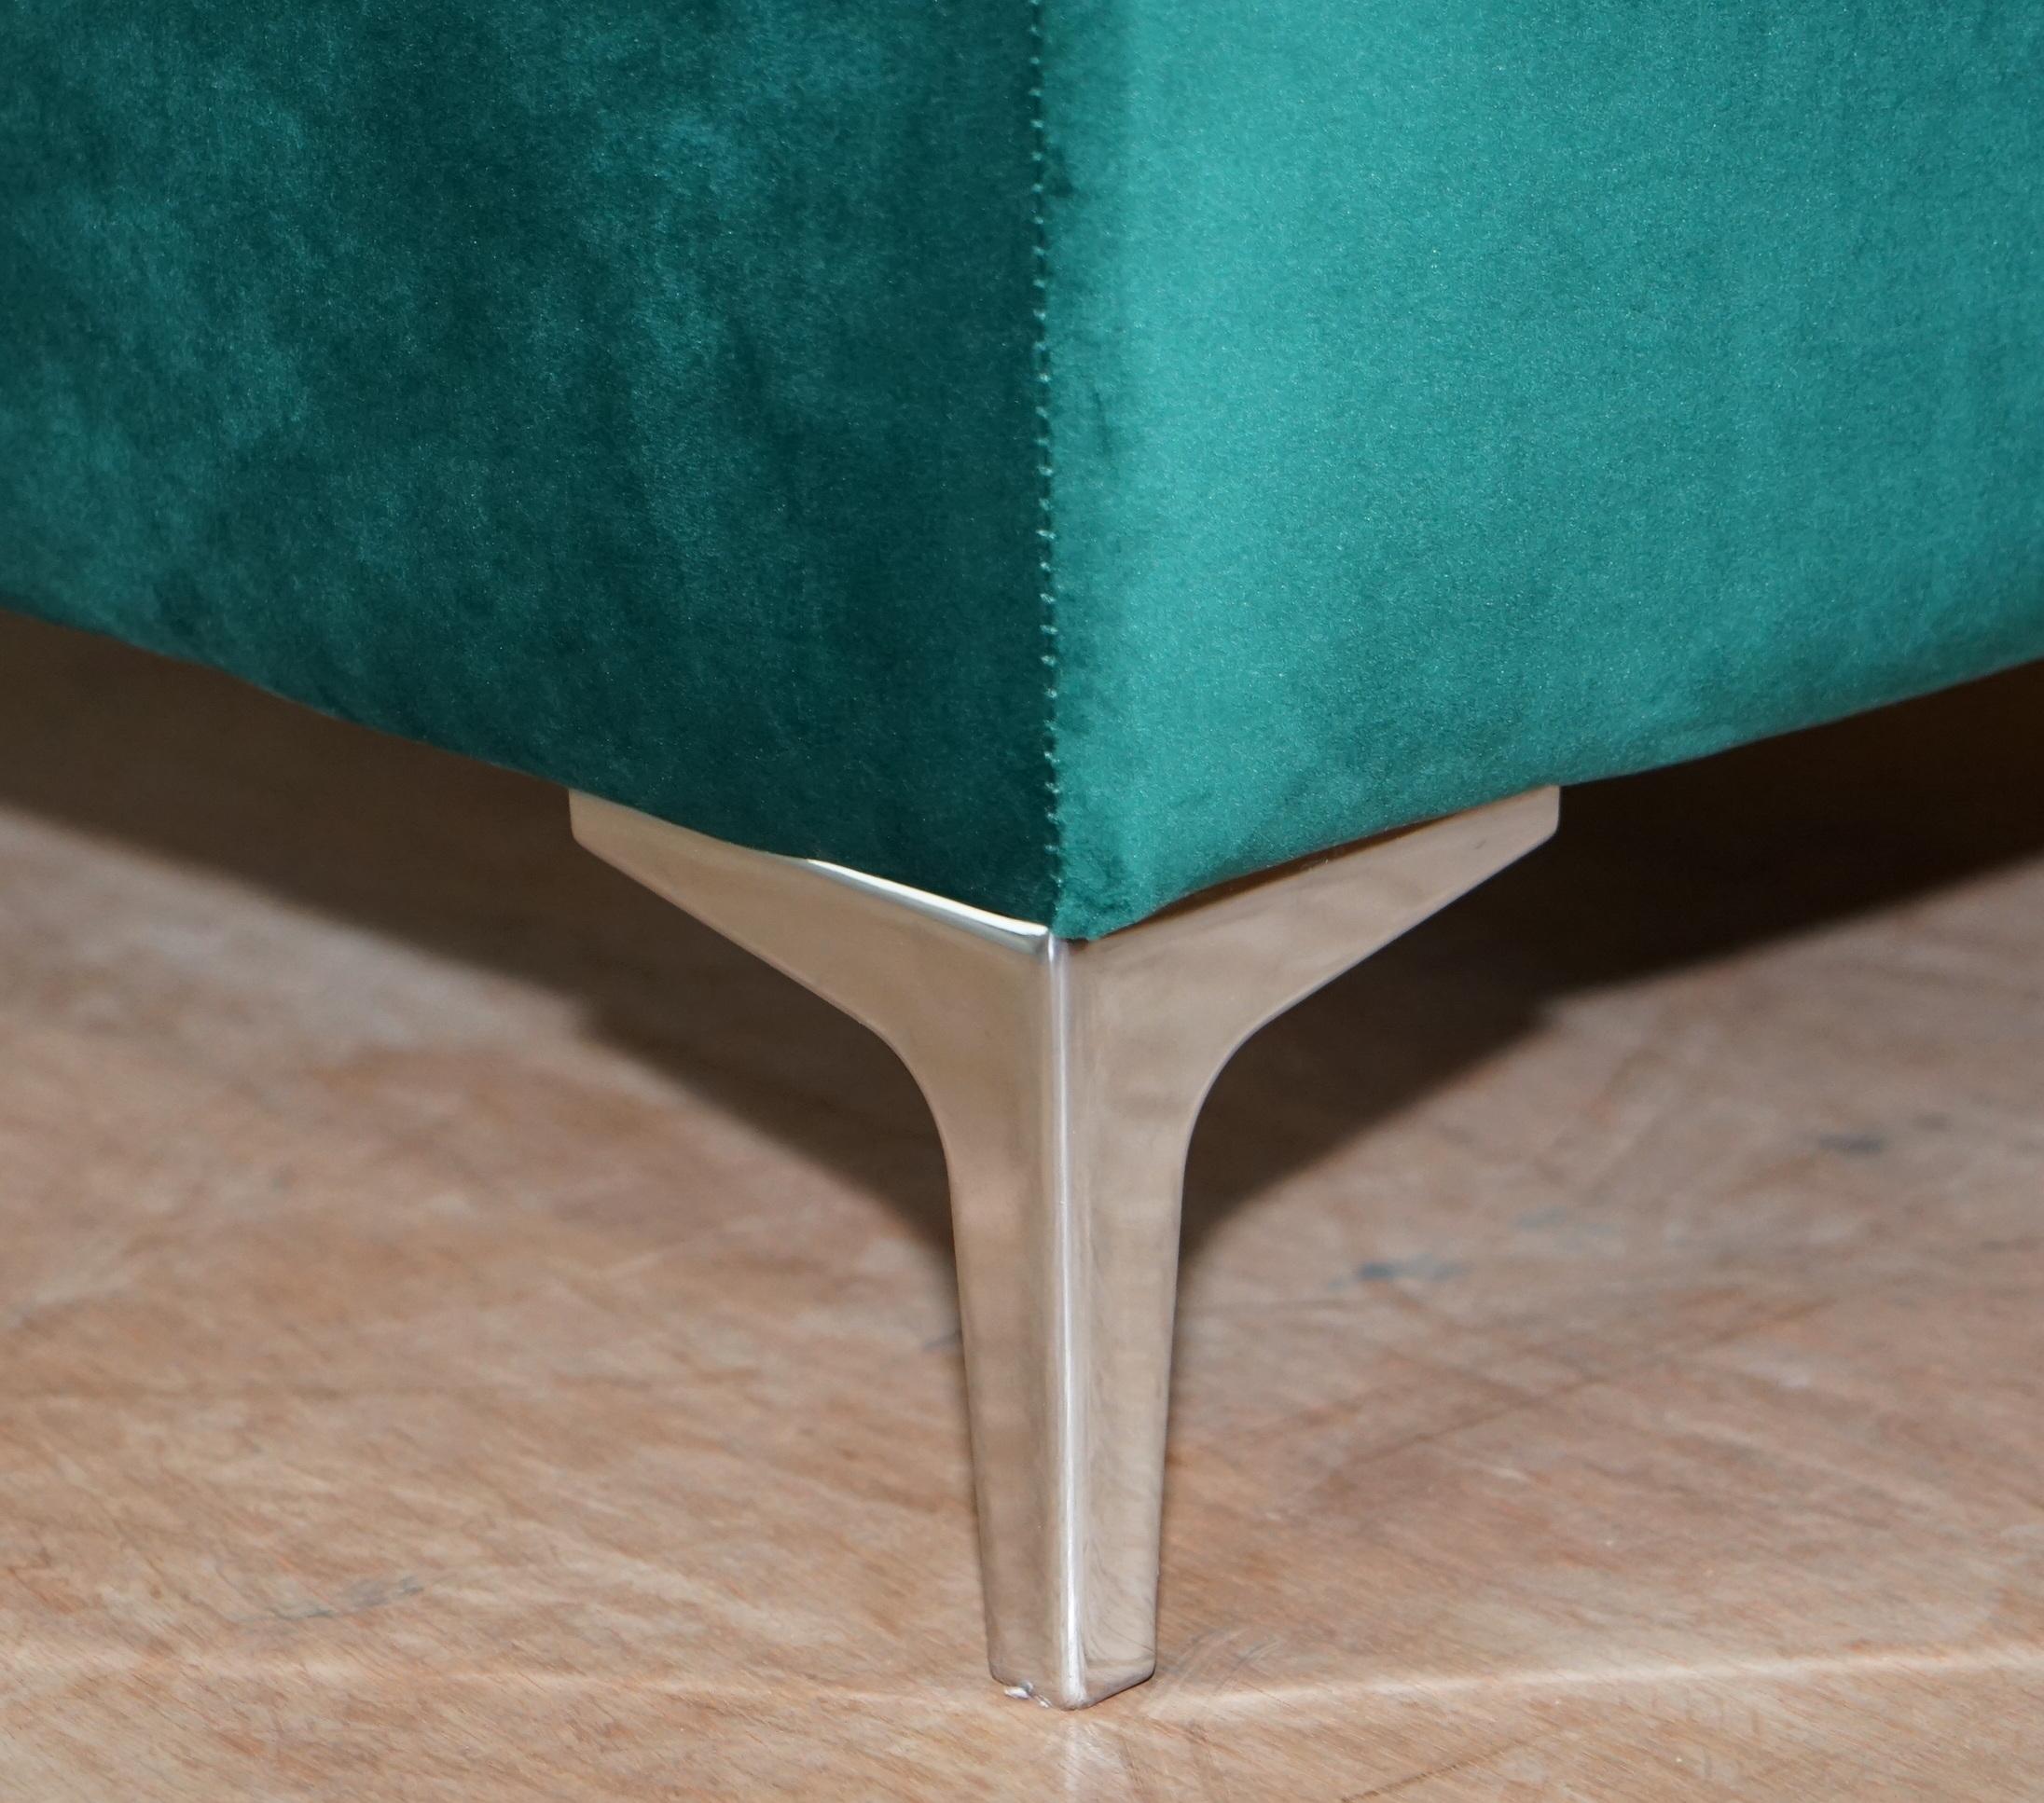 Hand-Crafted Stunning Ex Display Emerald Green Velvet Large Ottoman Footstool or Bench Seat For Sale